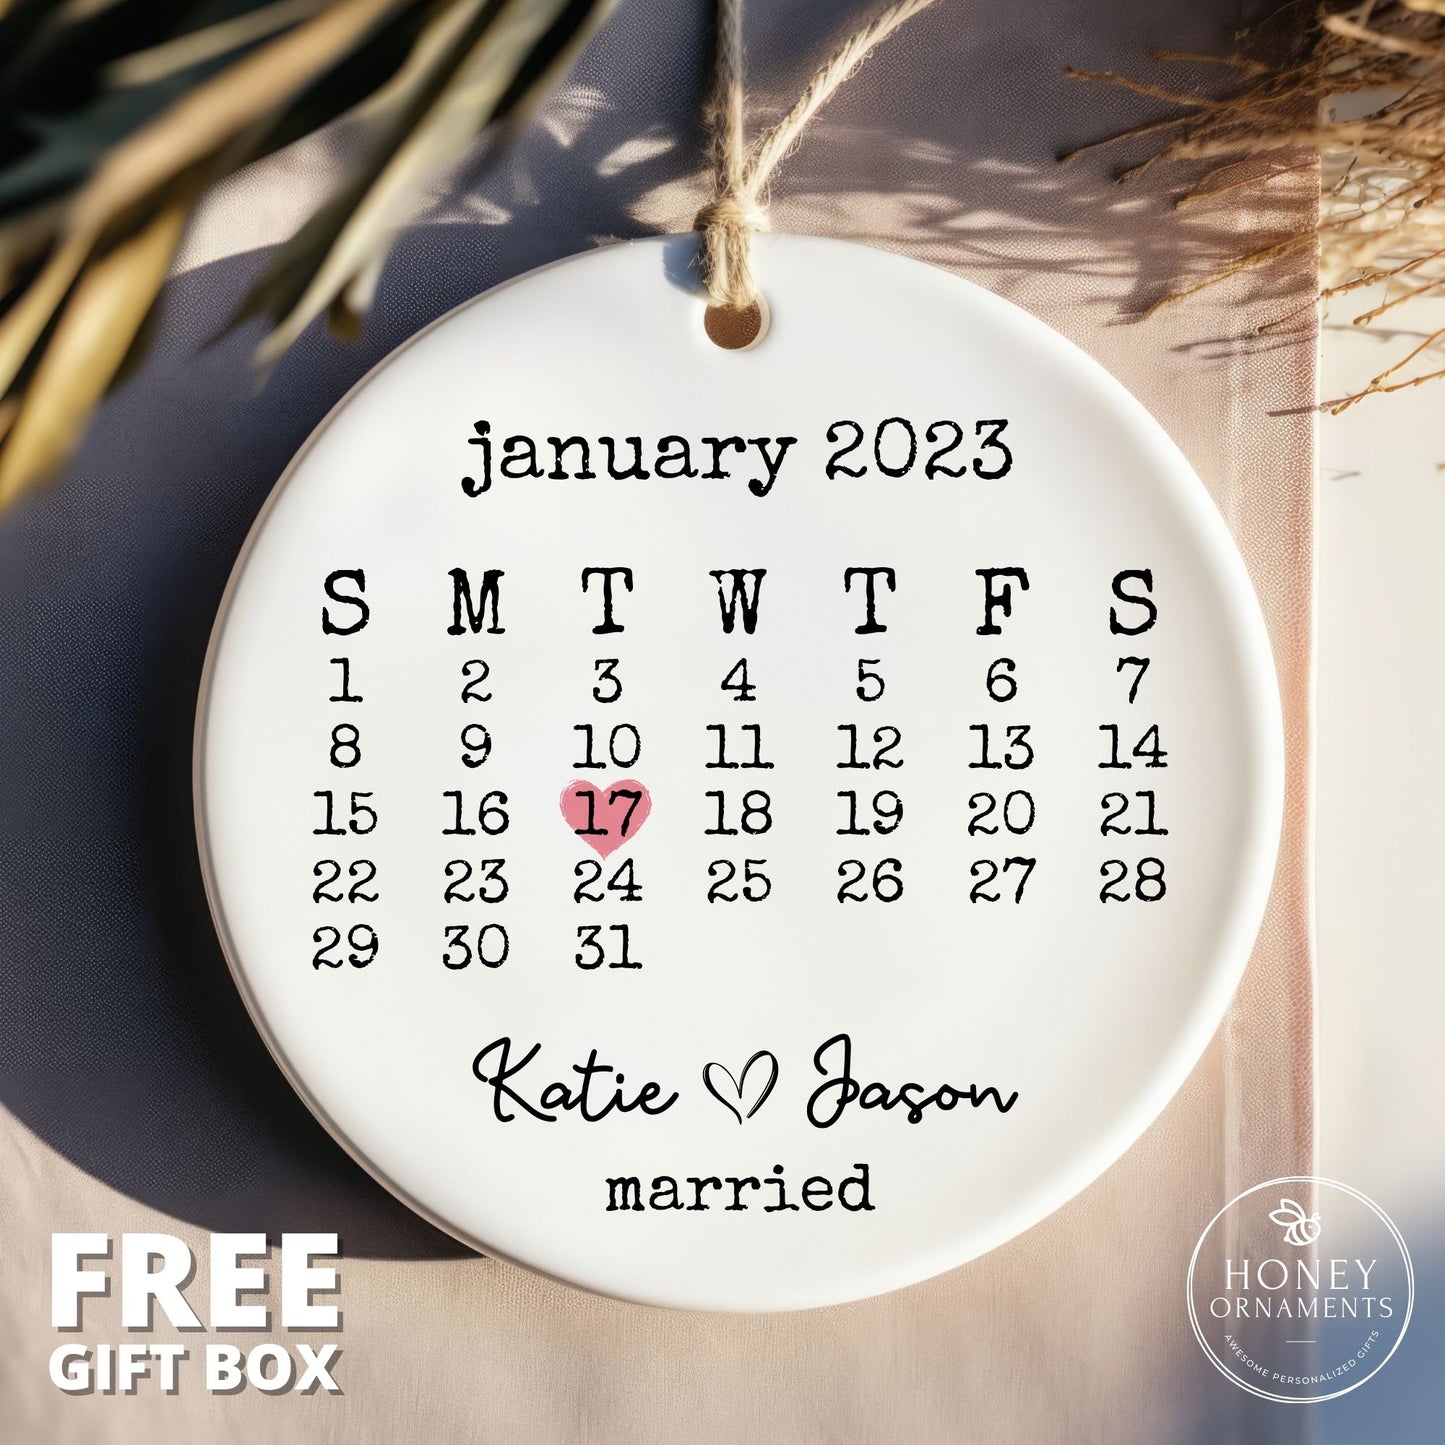 Personalized Engagement Gift, Married Ornament, Anniversary Gift, Newly Married Gift, Wedding Date Gift, Our First Christmas Calendar Gift